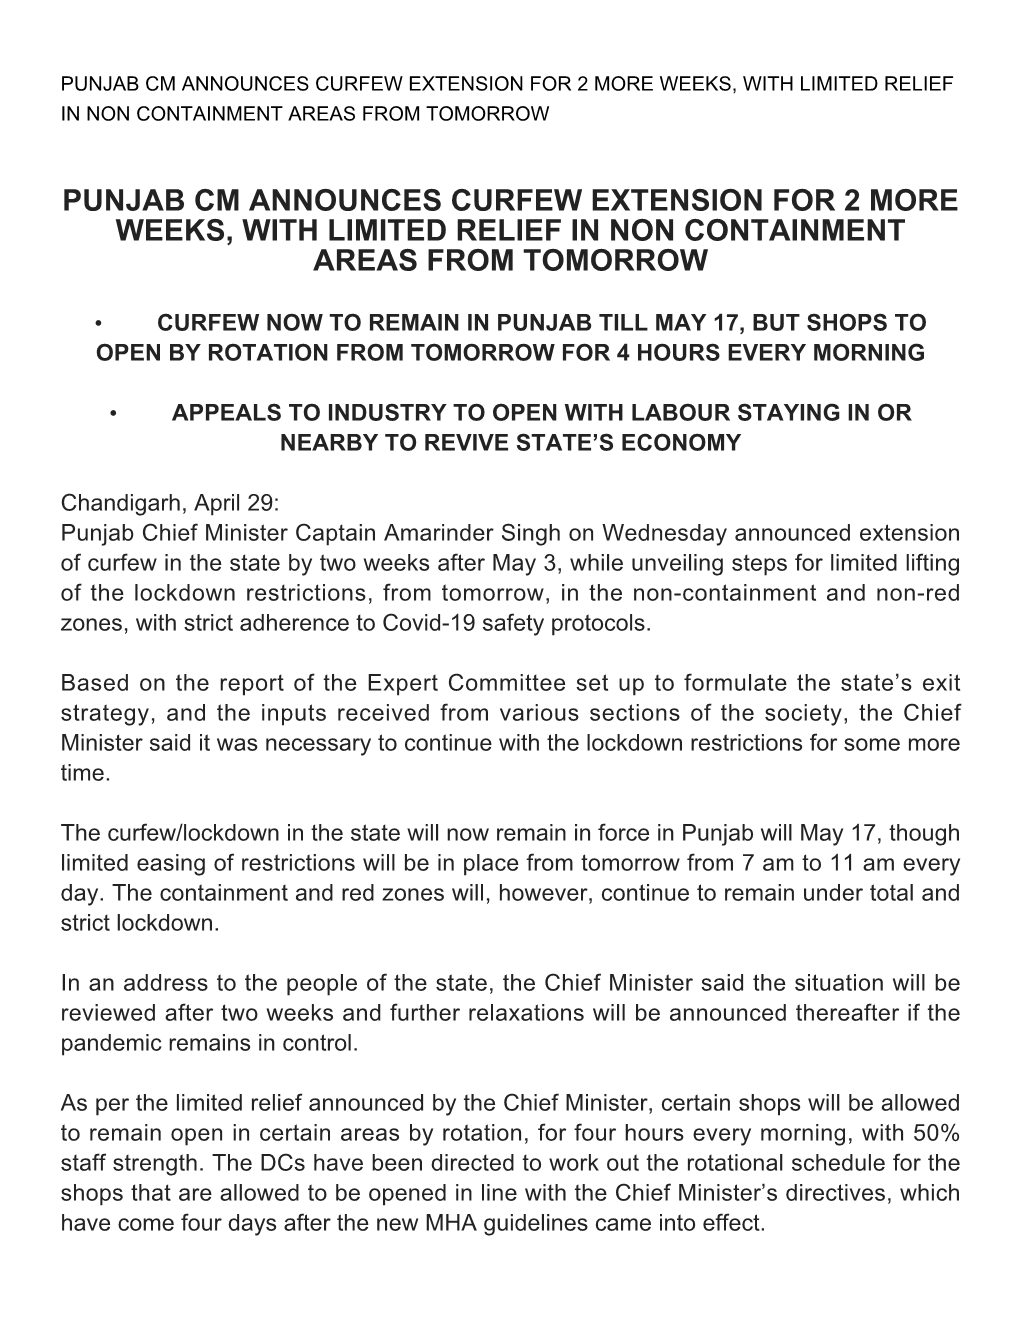 Punjab Cm Announces Curfew Extension for 2 More Weeks, with Limited Relief in Non Containment Areas from Tomorrow